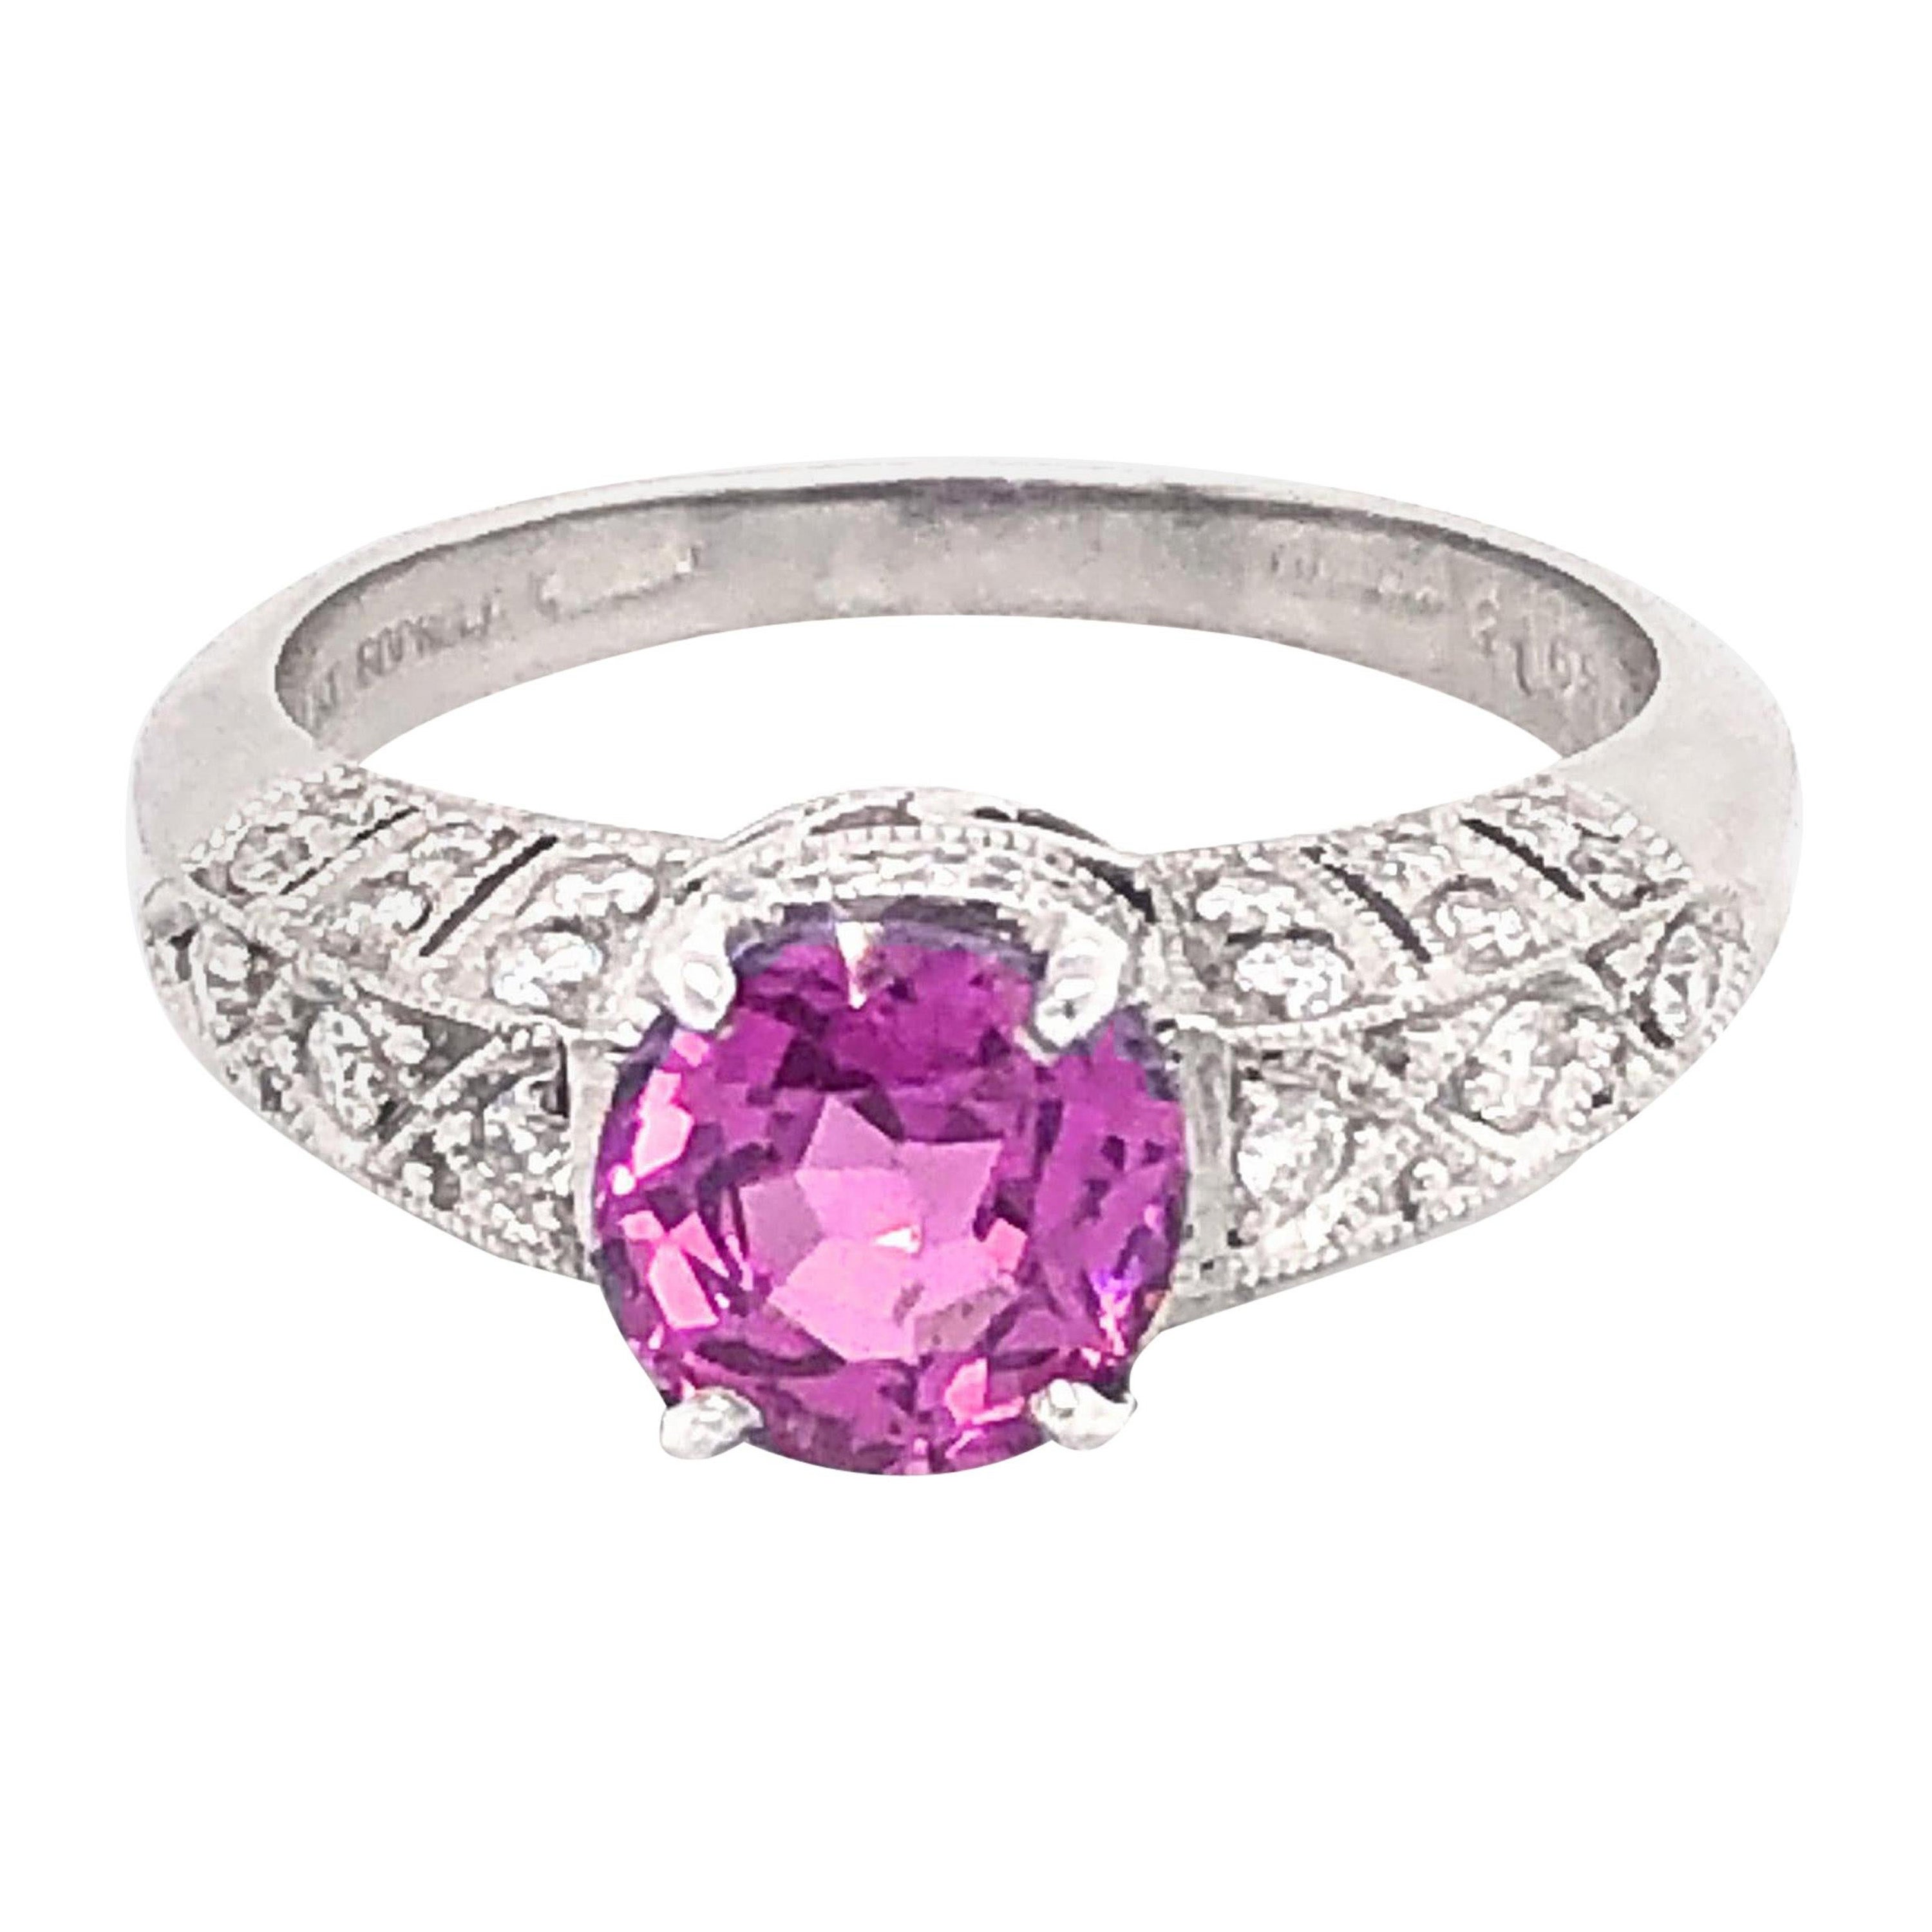 Pink Sapphire 1.57 Carats and Diamond Platinum Ring, Circa 2009 For Sale